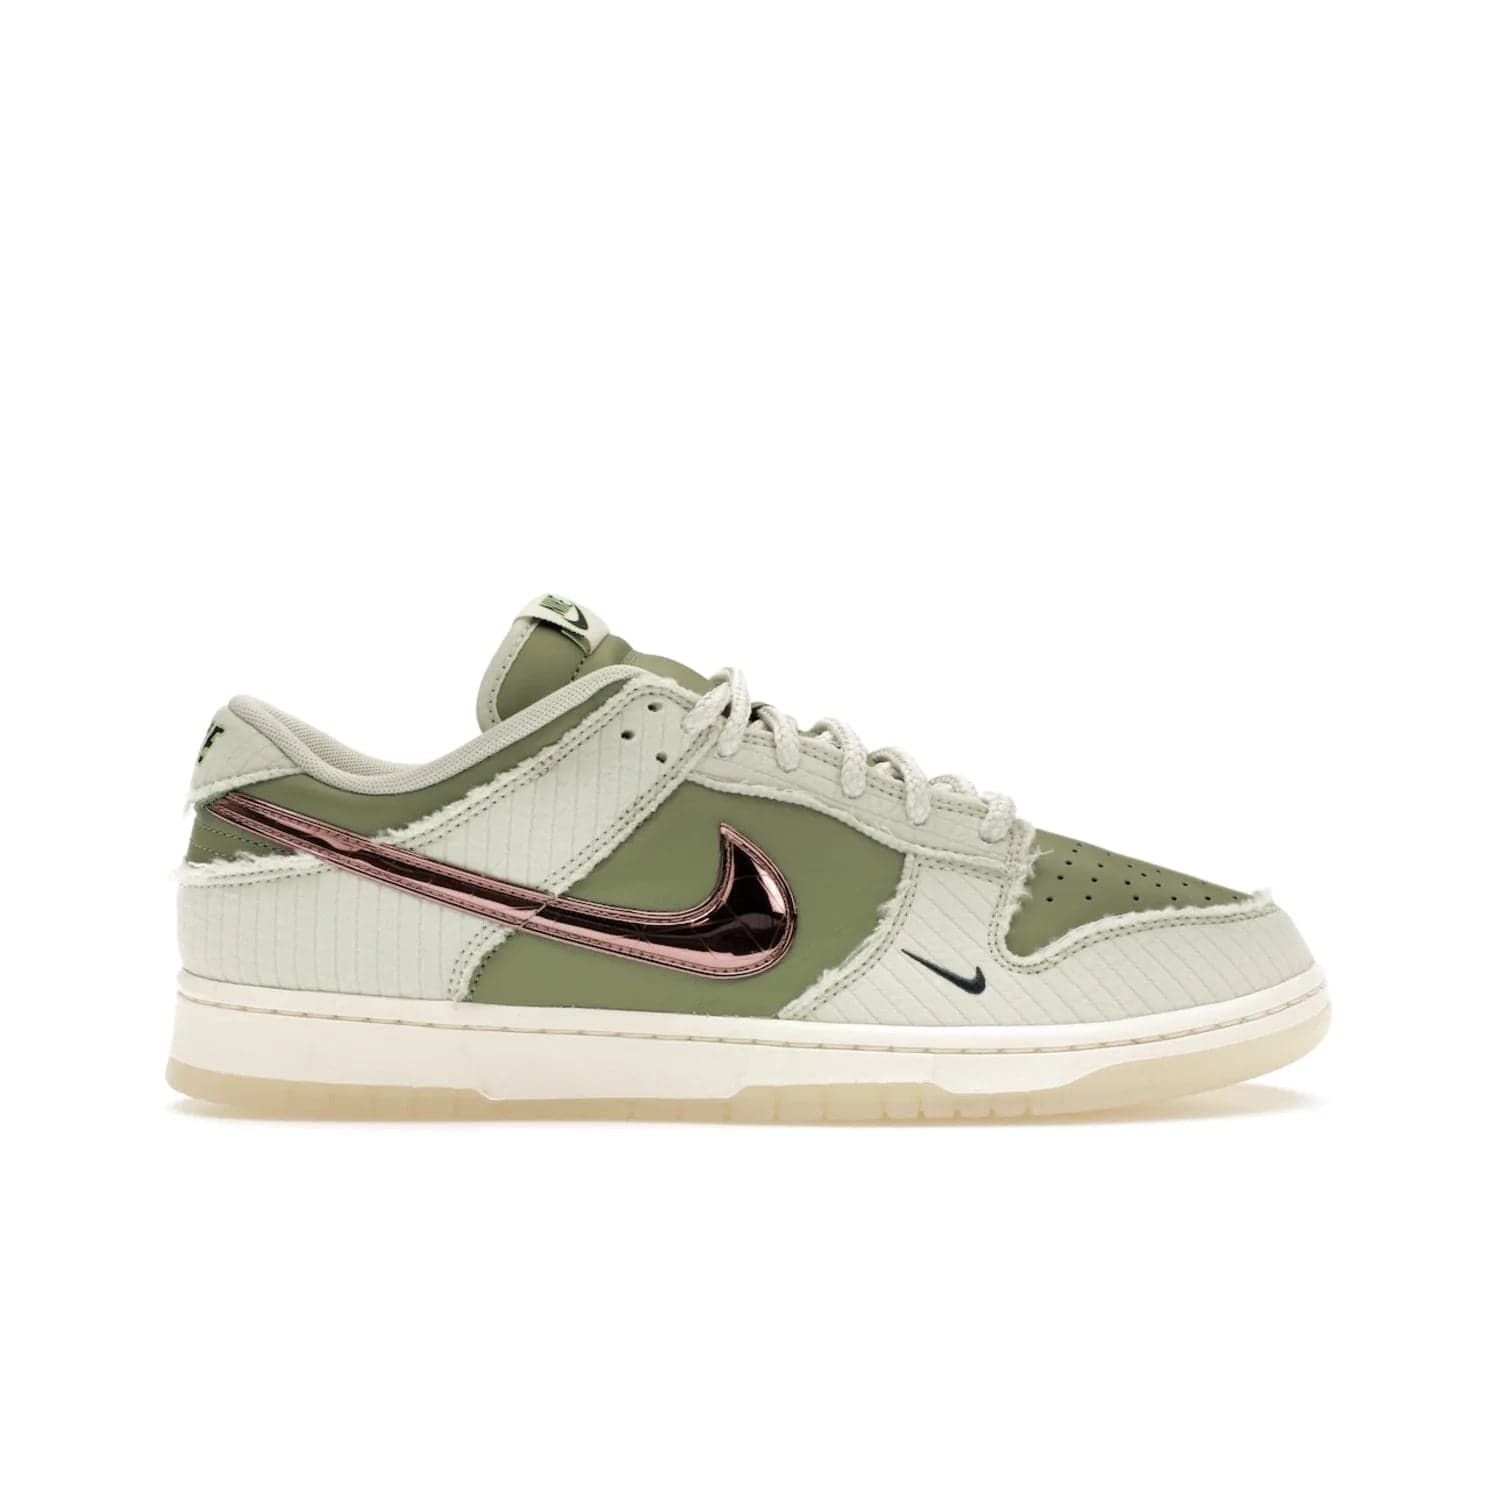 Nike Dunk Low Retro PRM Kyler Murray Be 1 of One - Image 1 - Only at www.BallersClubKickz.com - Introducing the Nike Dunk Low Retro PRM Kyler Murray "Be 1 of One"! A Sea Glass upper with Sail and Oil Green accents, finished with Rose Gold accents. Drop date: November 10th.